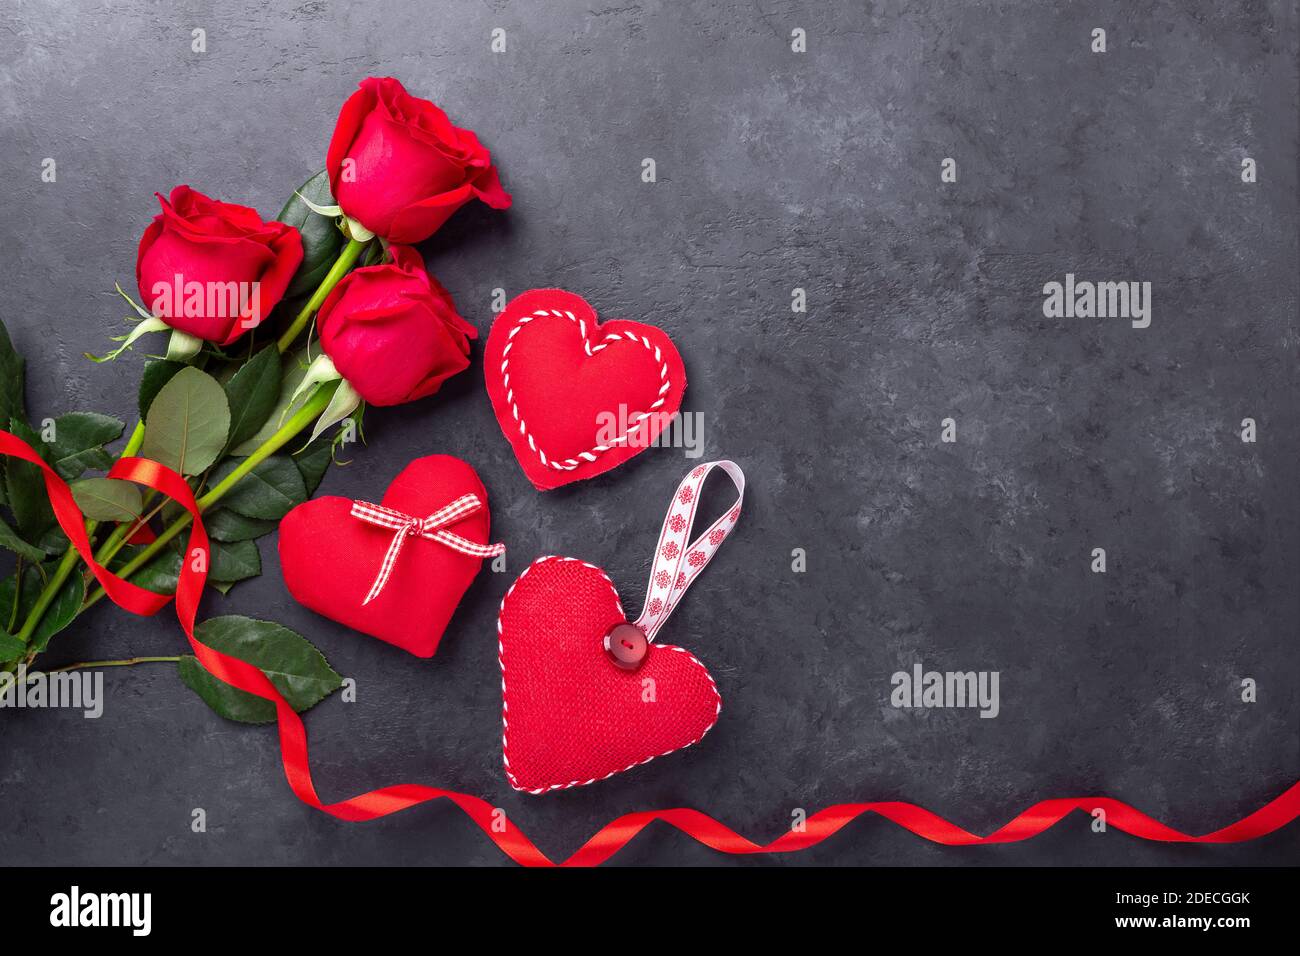 Valentines day greeting card. Red roses and textile hearts on stone background. Top view - Image Stock Photo